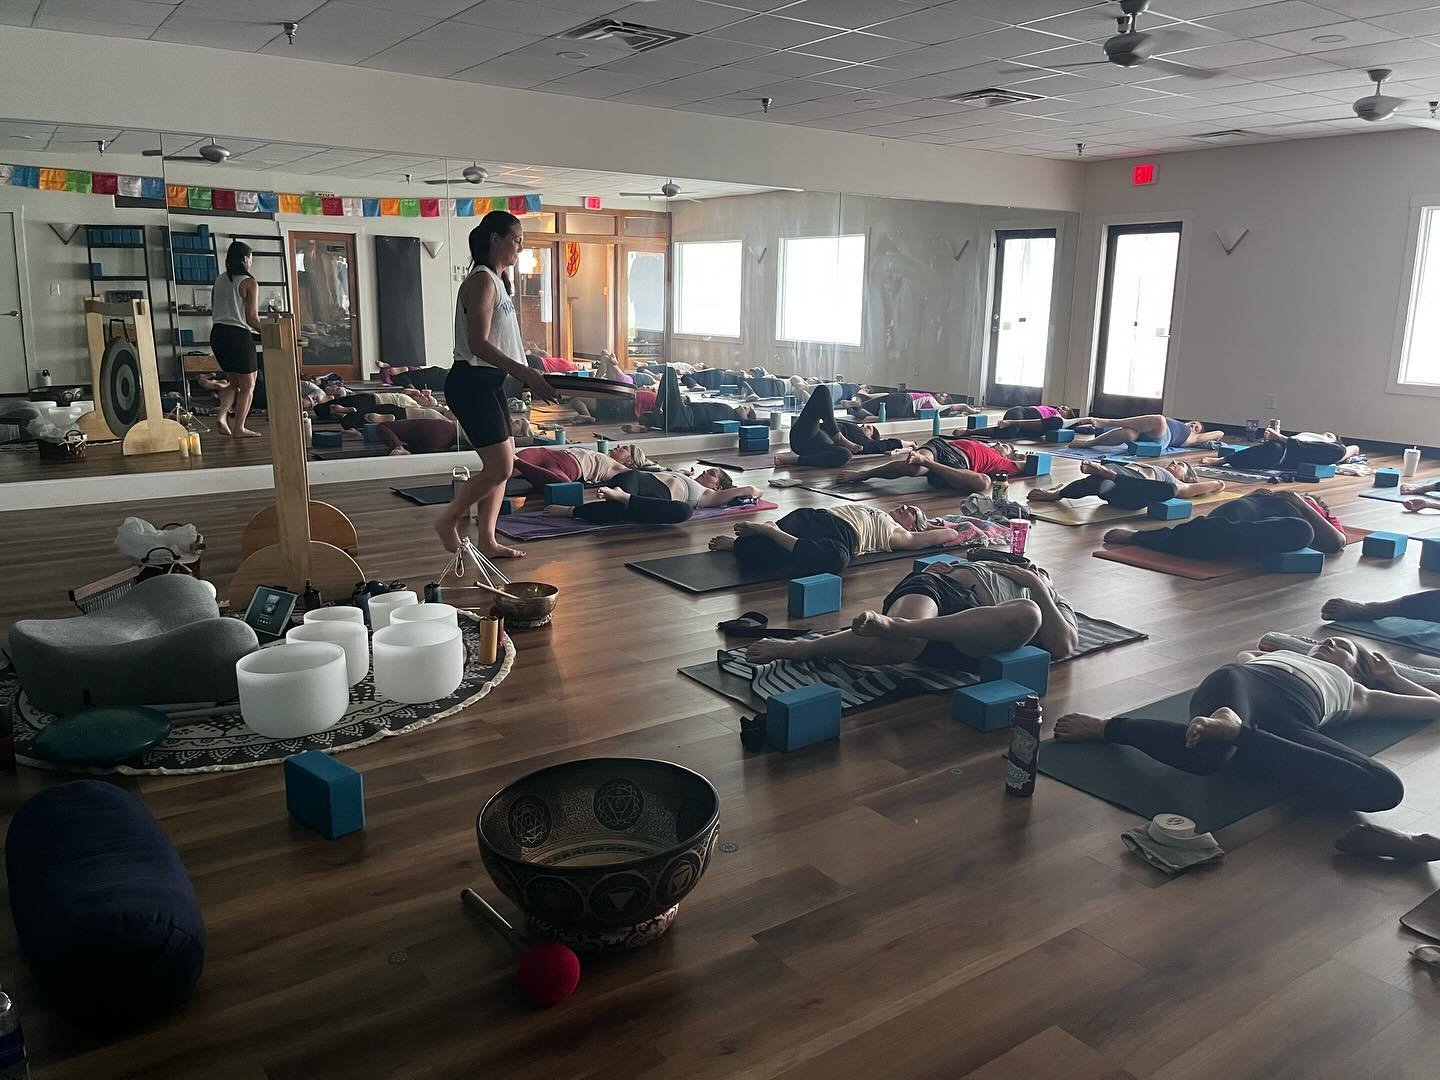 Today&rsquo;s open house was magical. Seeing so many familiar faces and meeting so many new faces brought immense joy into our hearts. Thank you to our instructors, Maureen for the incredible soundscape, and each student who joined in today&rsquo;s e